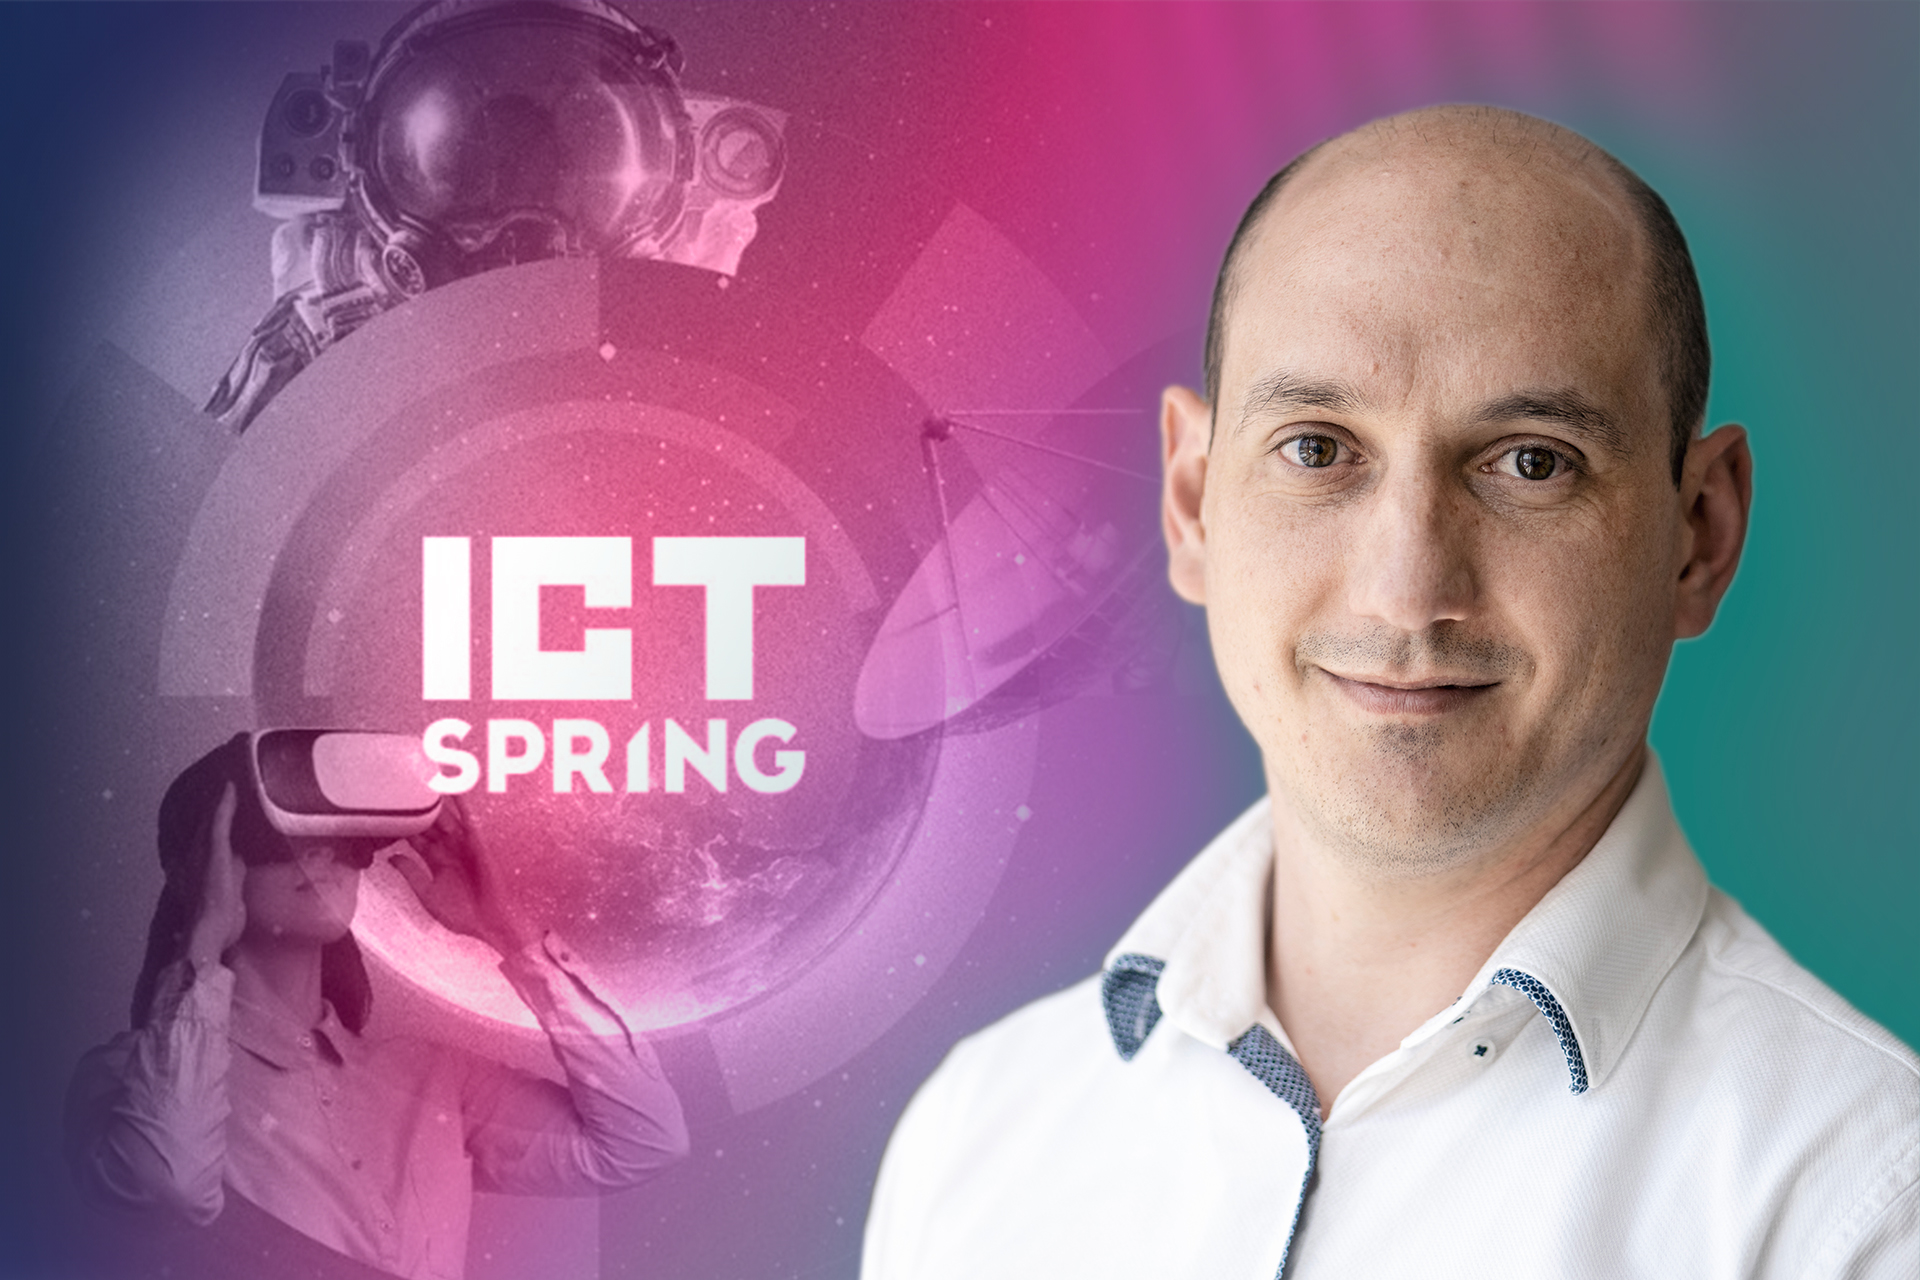 The ICT Spring Luxembourg is Coming Up Soon!